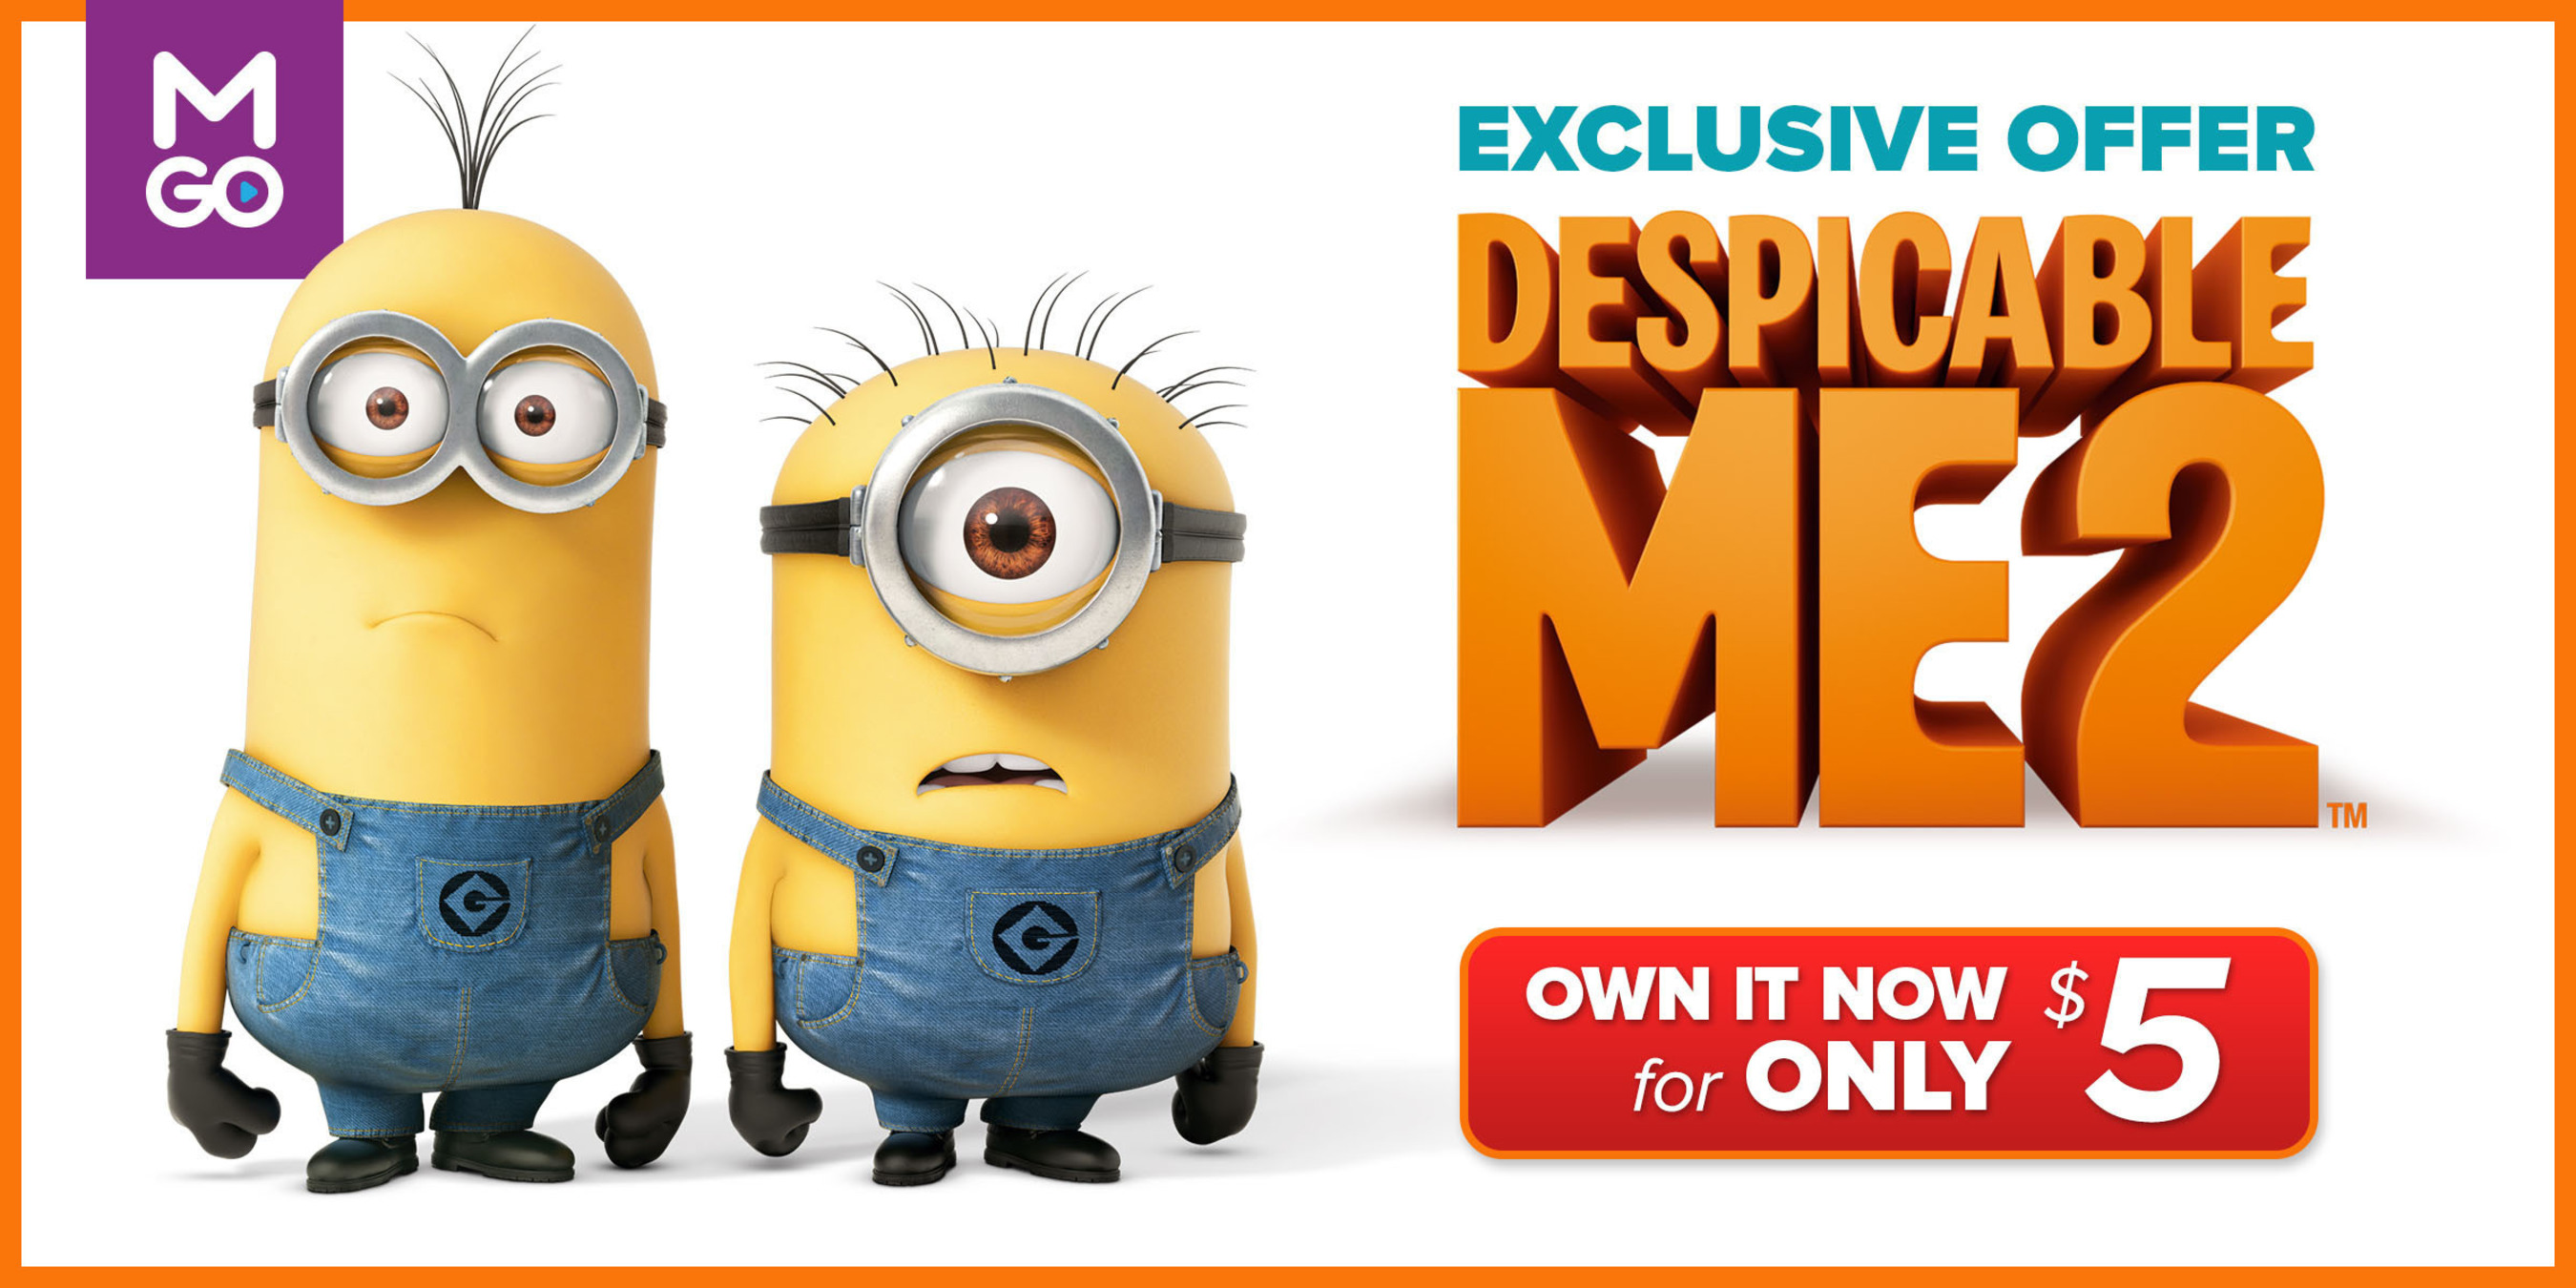 Despicable Me 2 For Just $5: M-GO Changes The Despicably Stressful Holiday Time To The Most Delightful With An Unbeatable Offer. (PRNewsFoto/M-GO) (PRNewsFoto/M-GO)